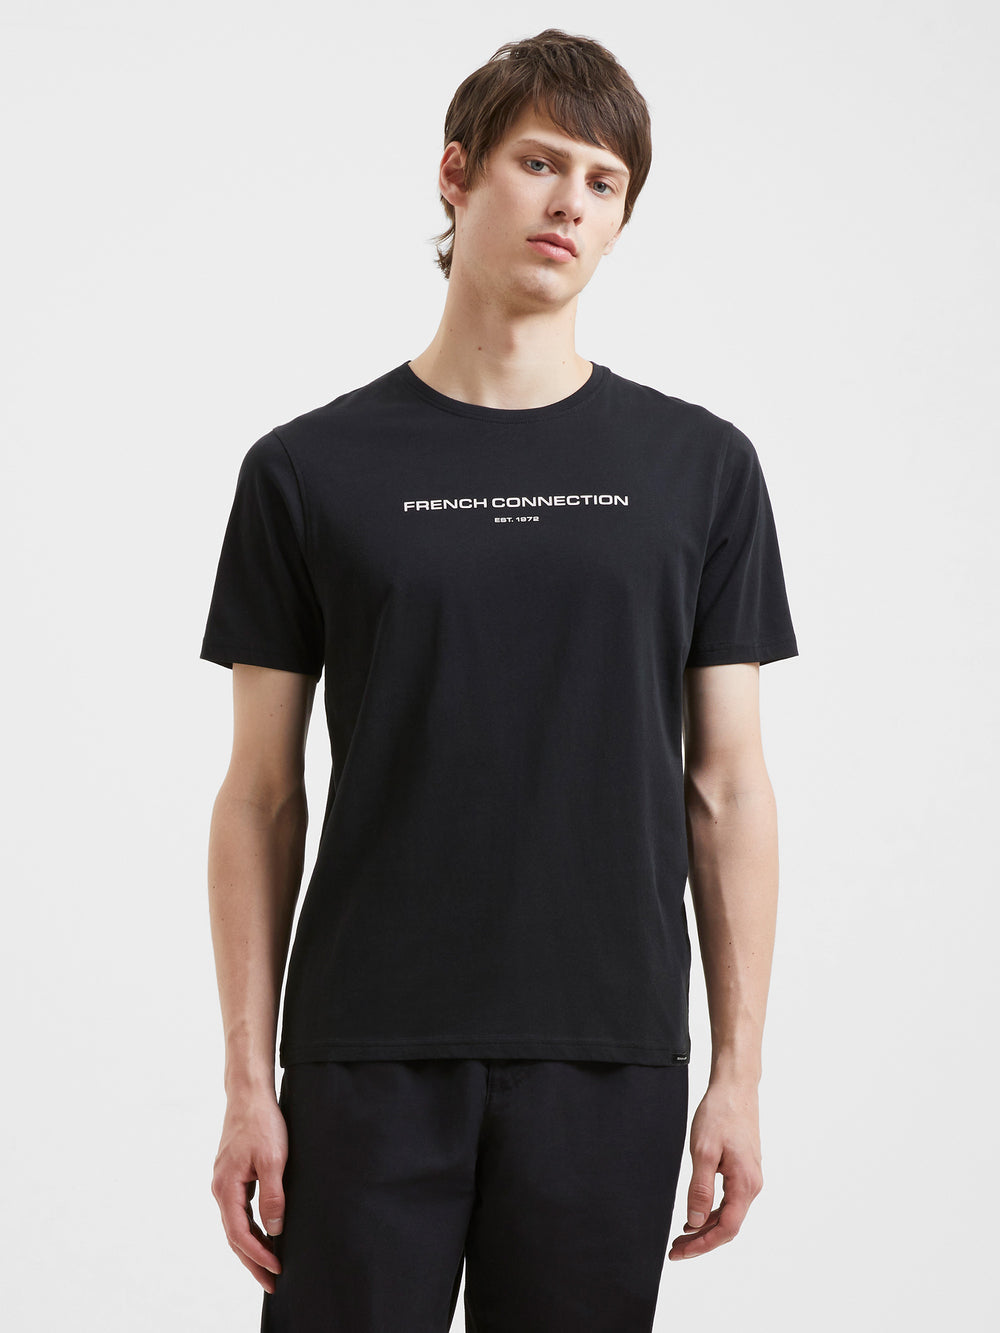 French Connection T-Shirt Black | French Connection UK